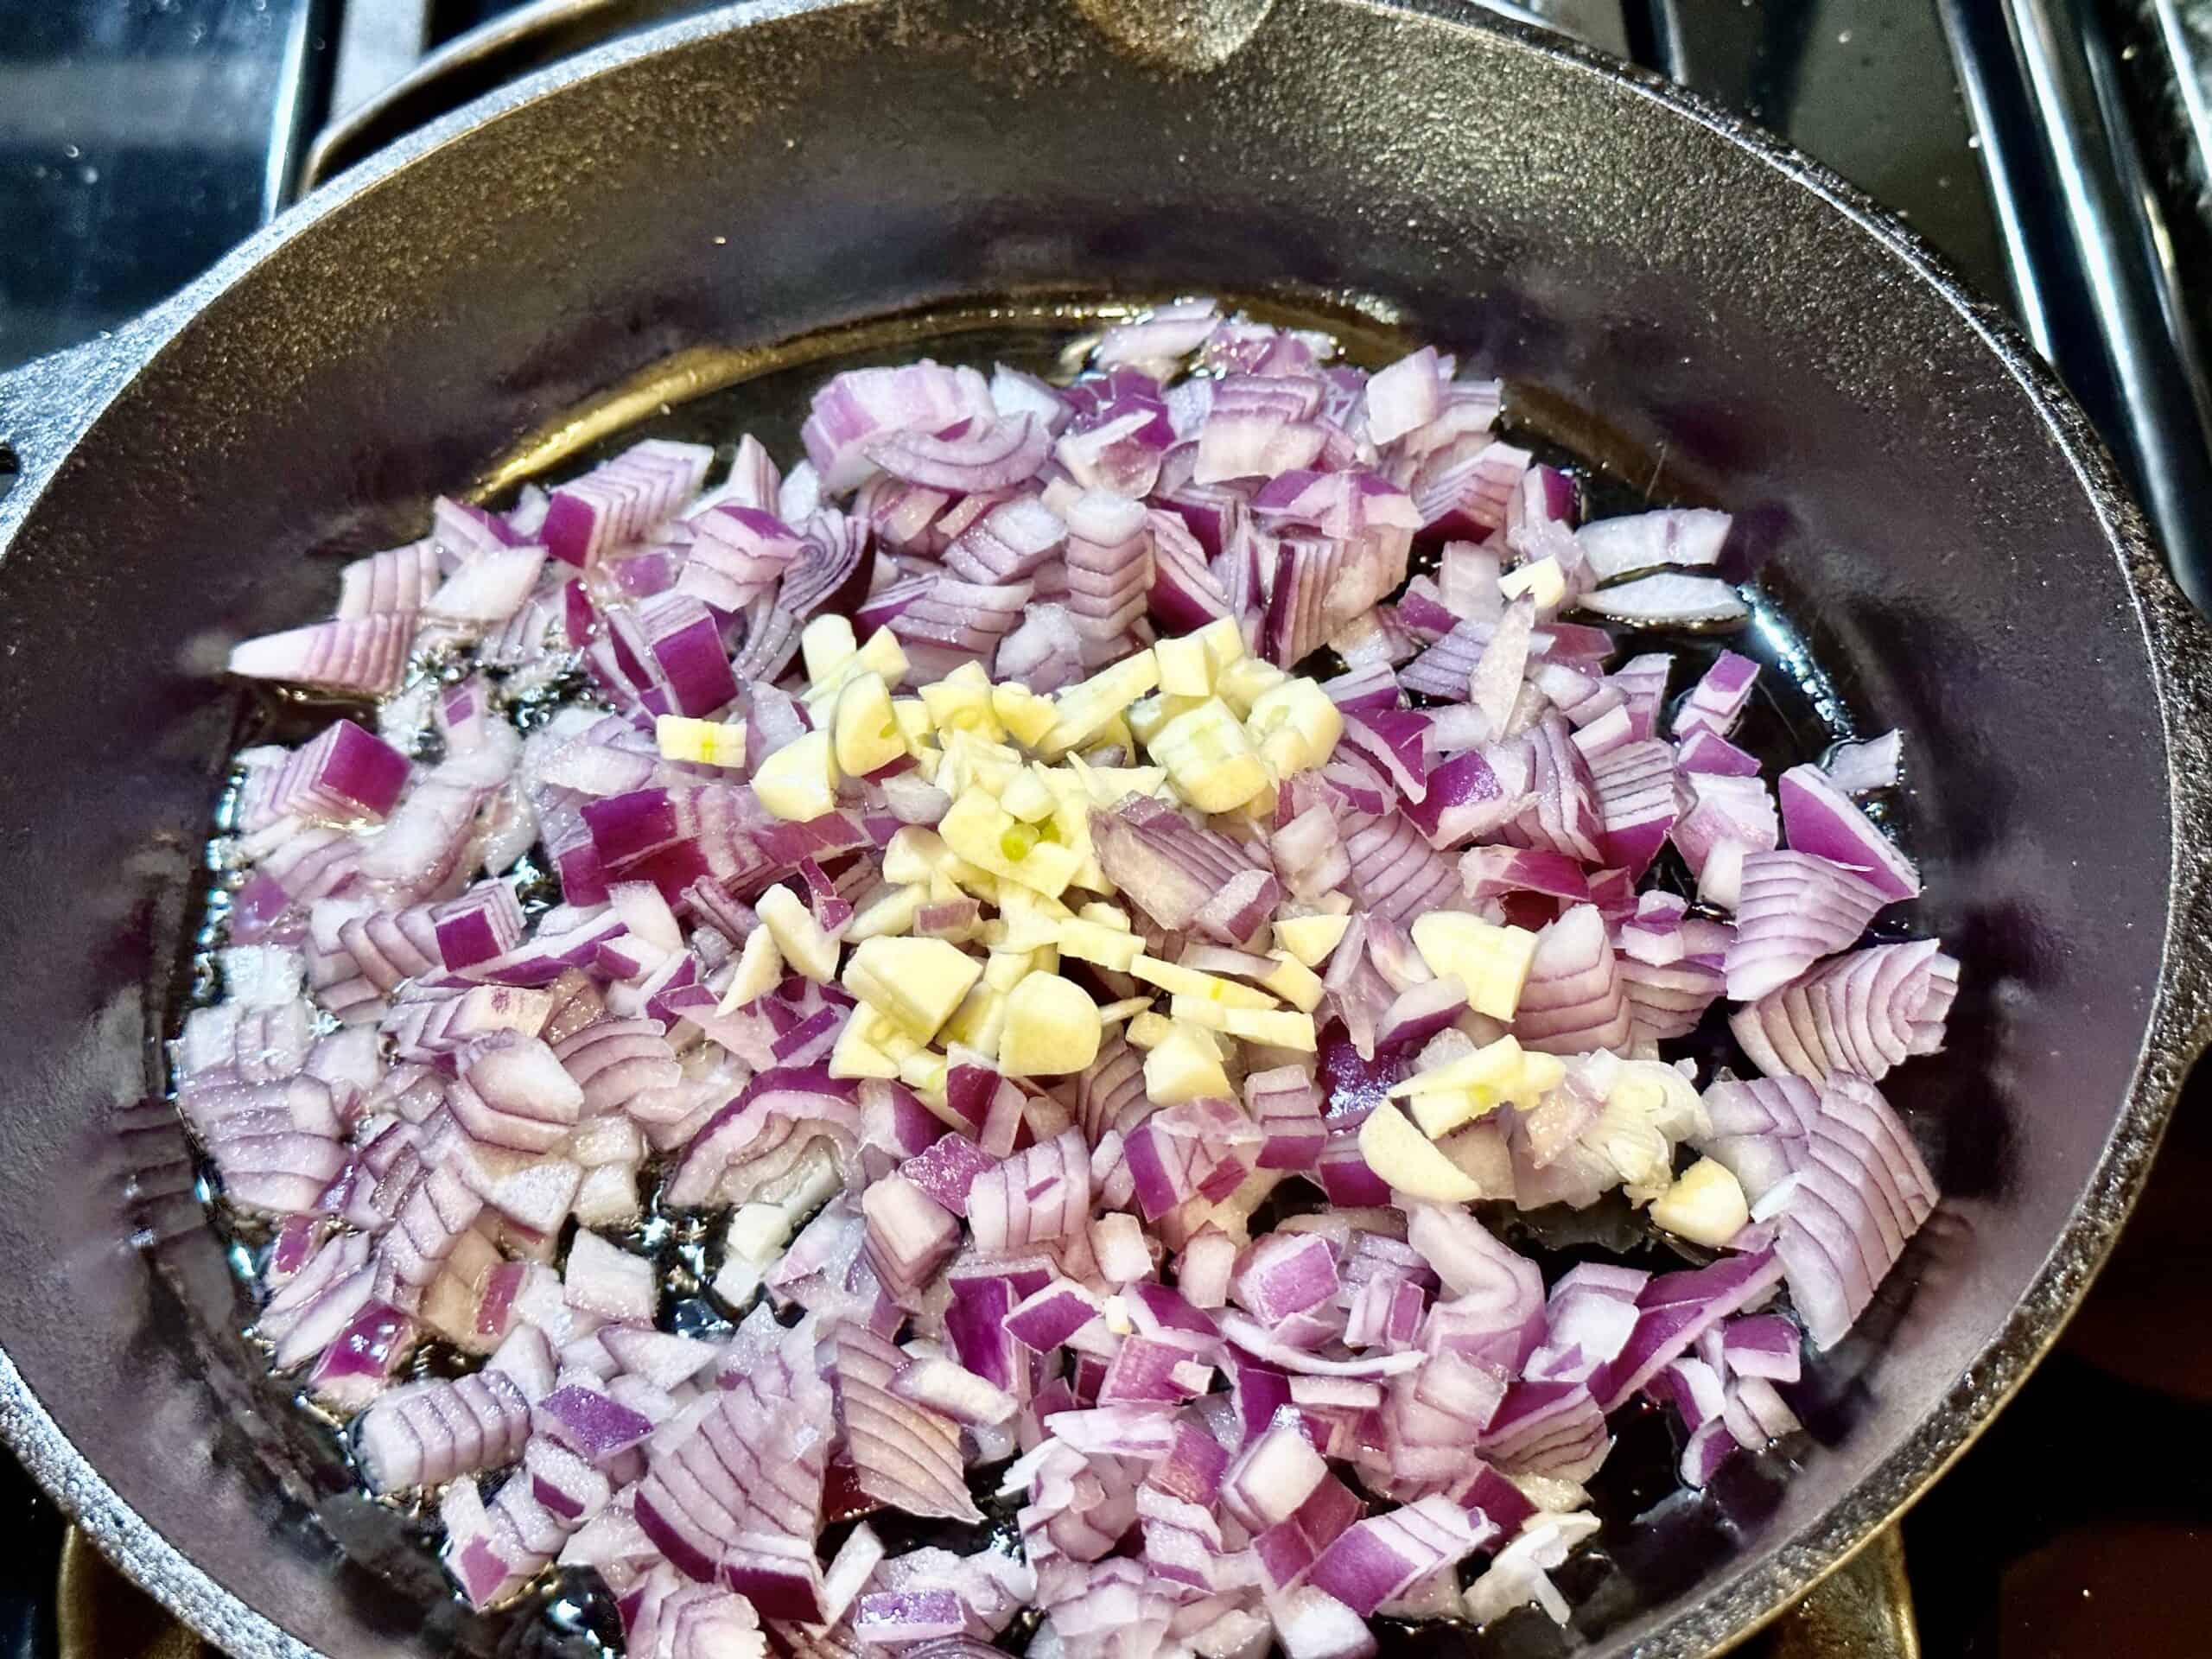 Diced onion and garlic on a hot skillet